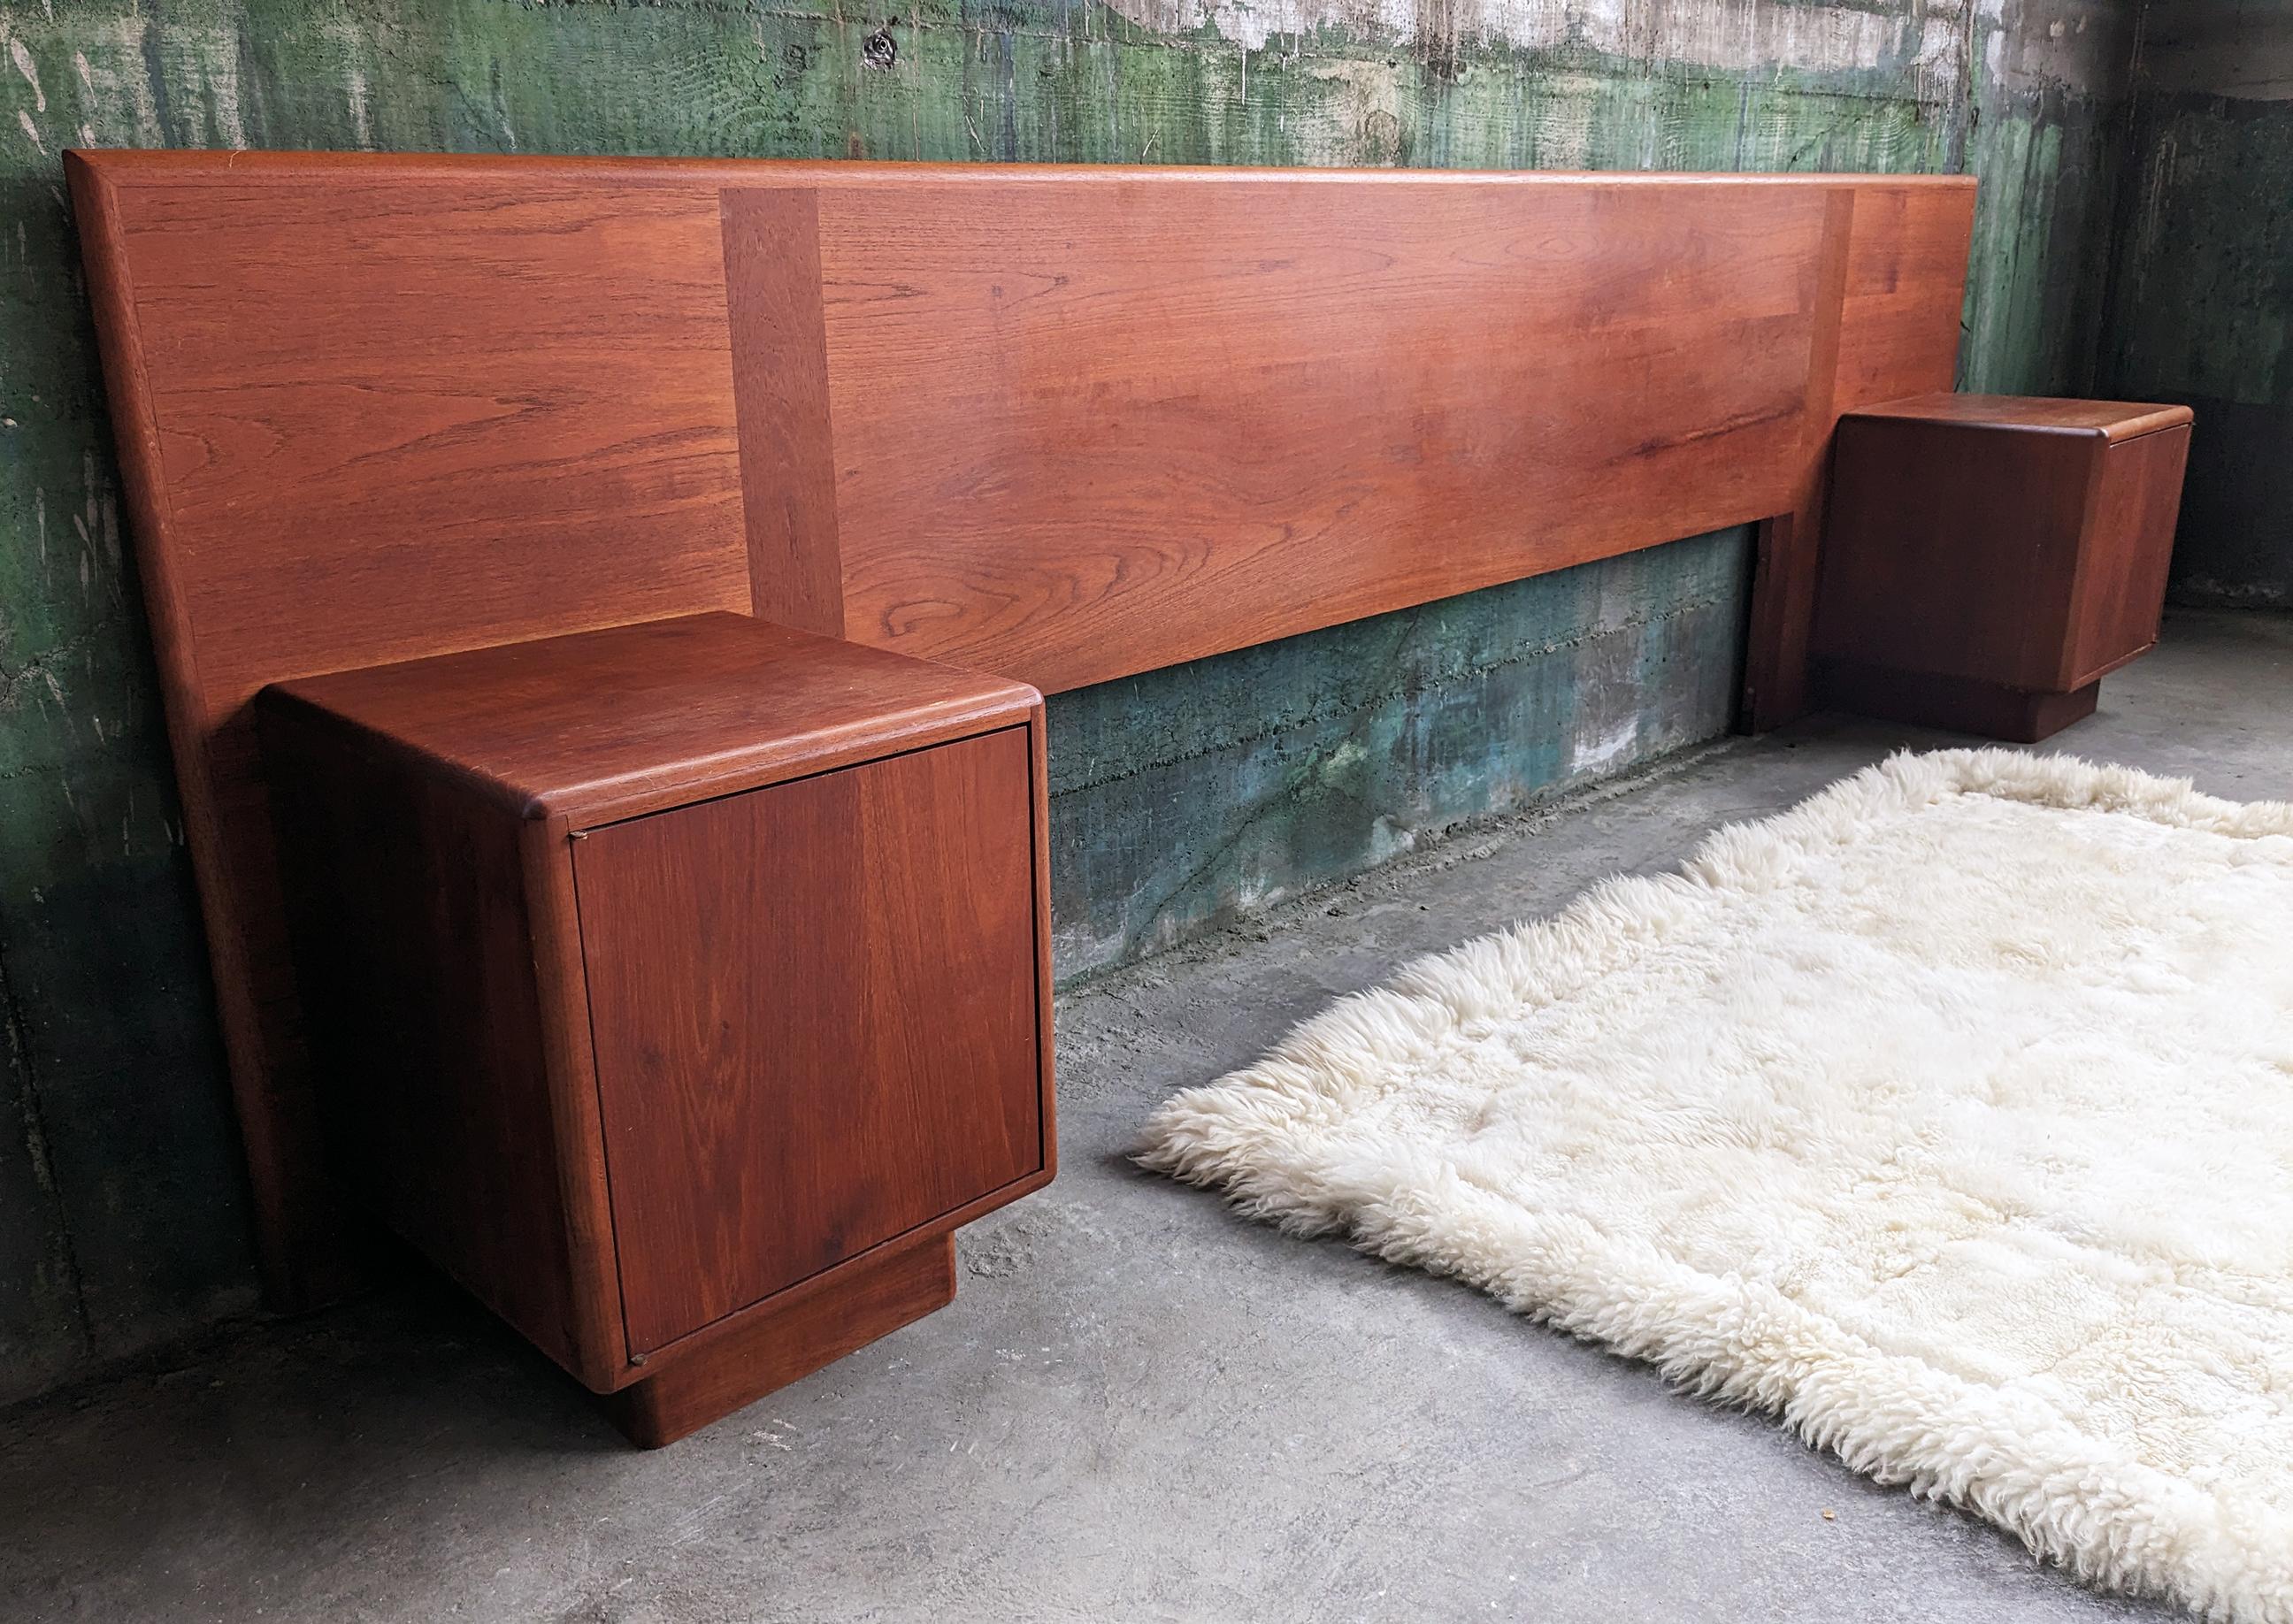 Danish MCM Long Rosewood Teak Headboard with Attached Storage Nightstands, 70s In Good Condition For Sale In Madison, WI